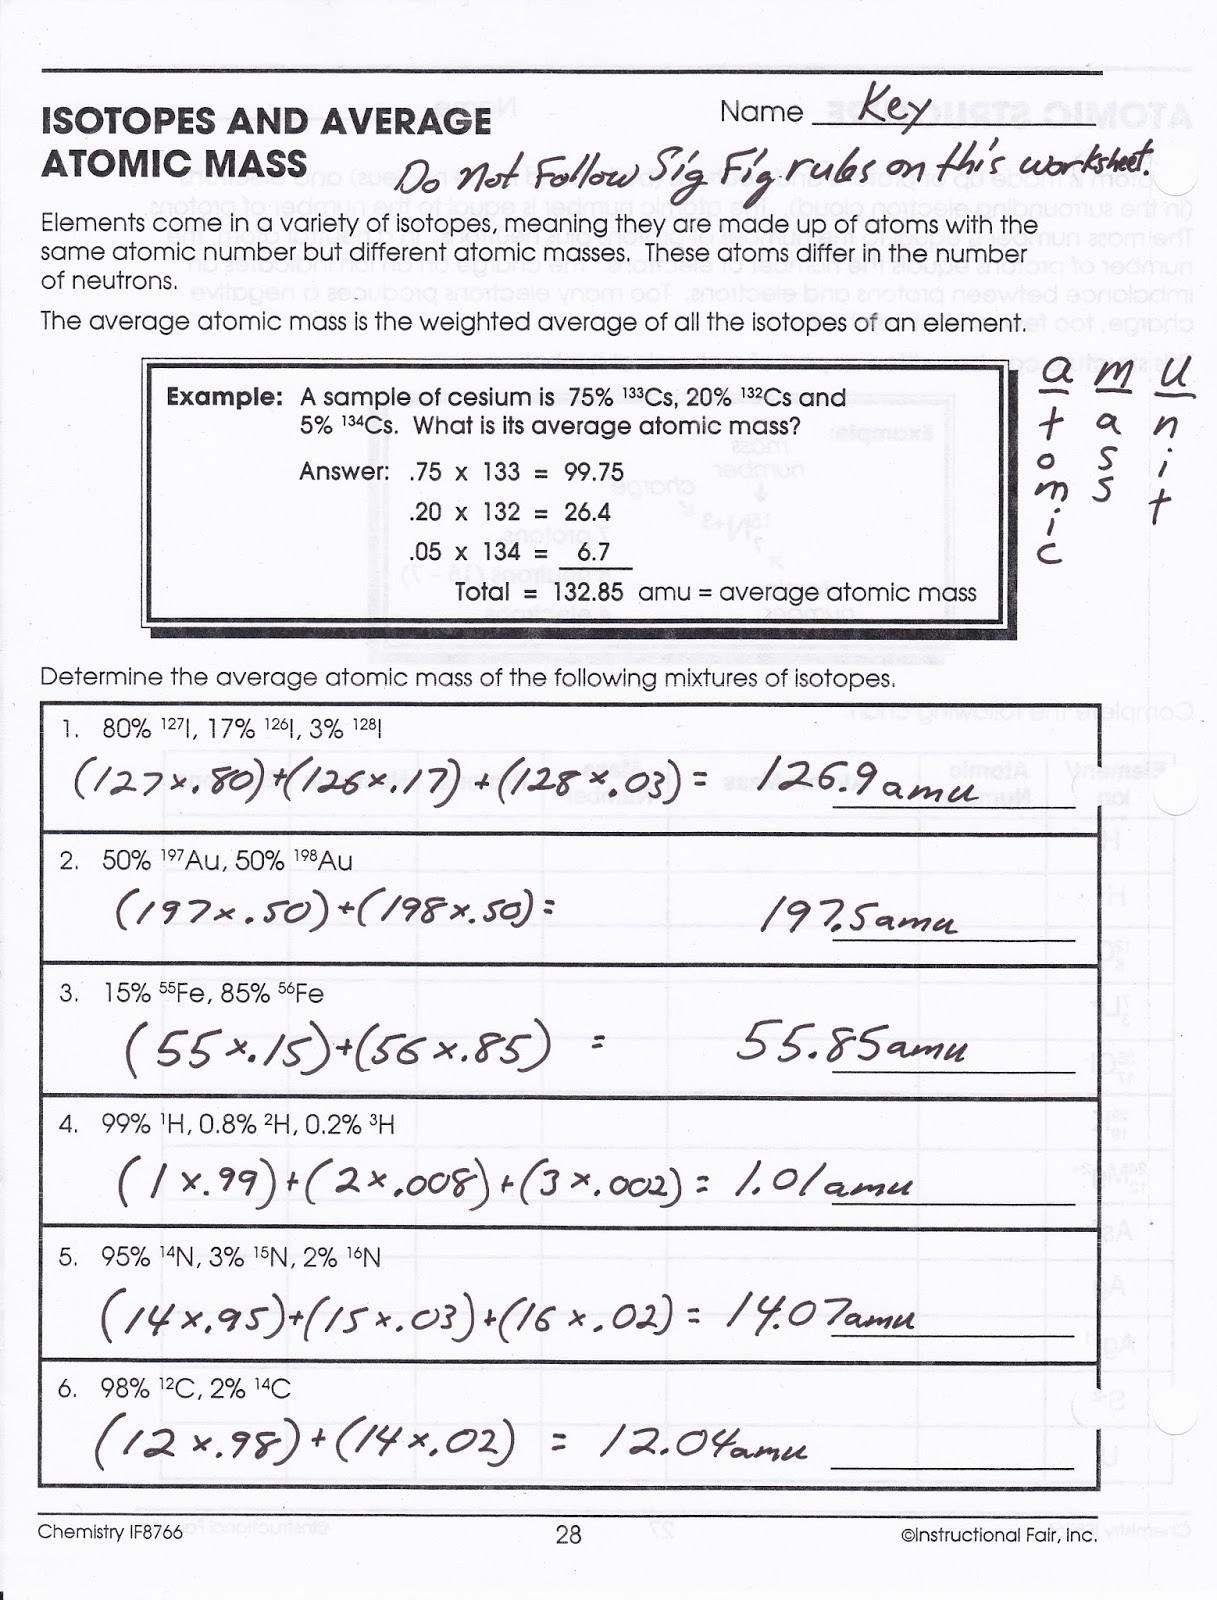 determination-of-average-atomic-mass-worksheet-for-10th-db-excel